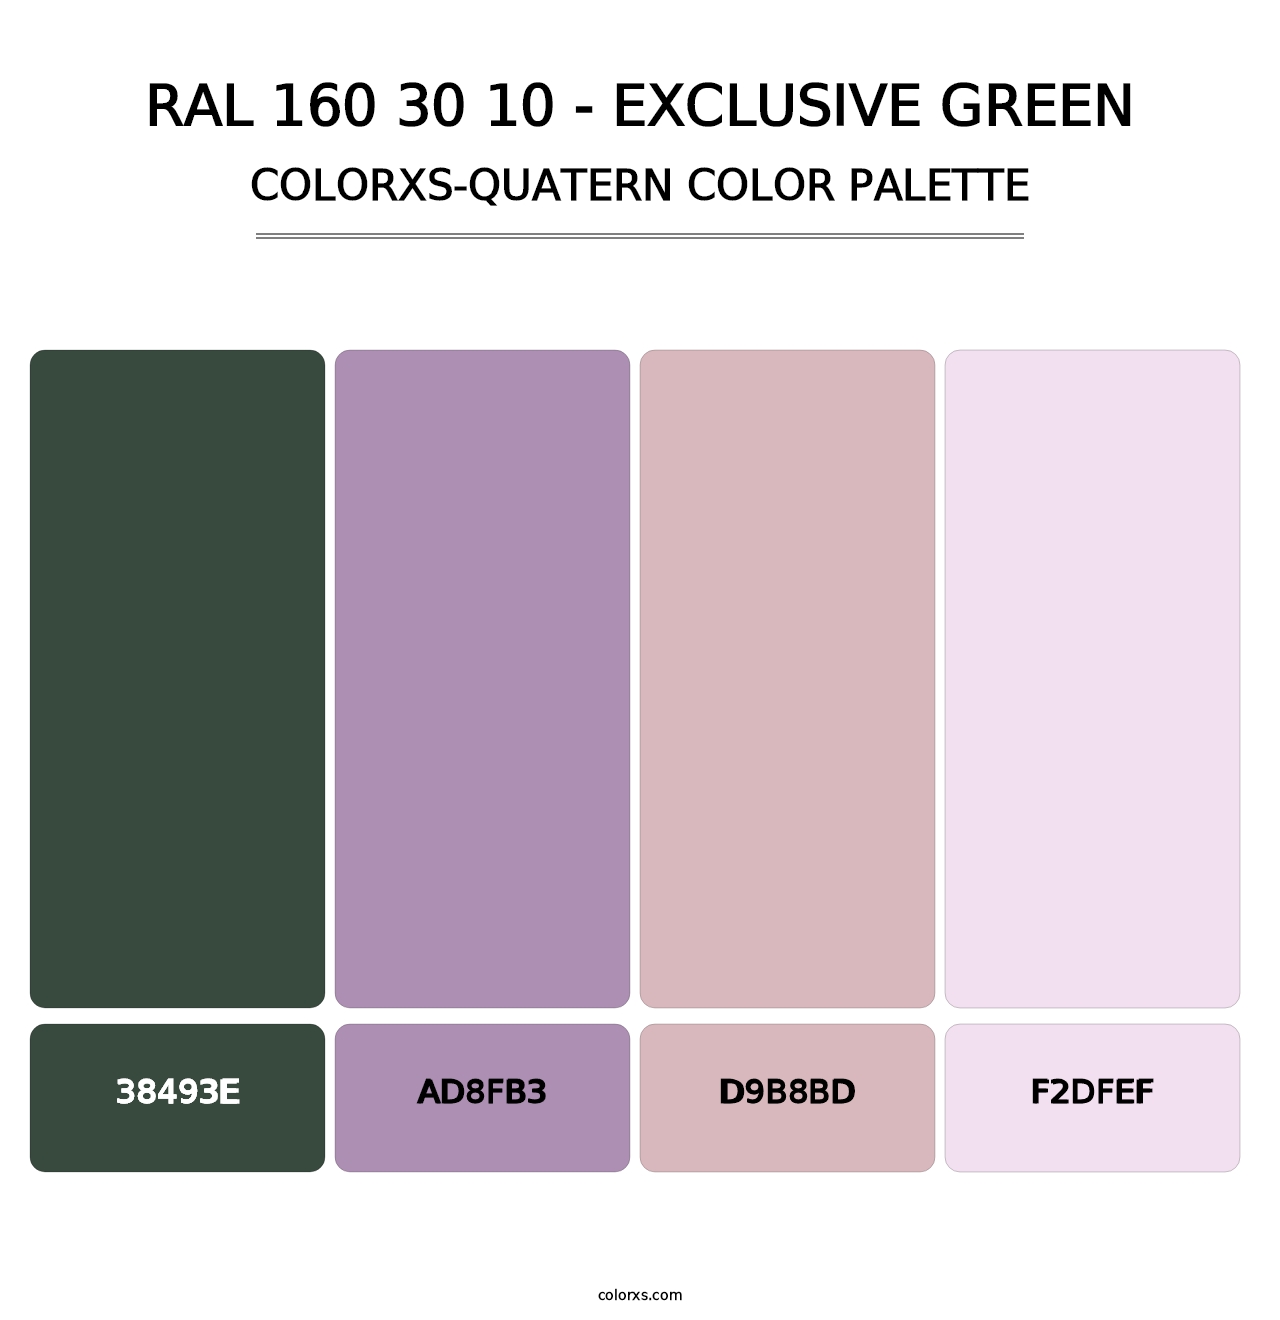 RAL 160 30 10 - Exclusive Green - Colorxs Quatern Palette